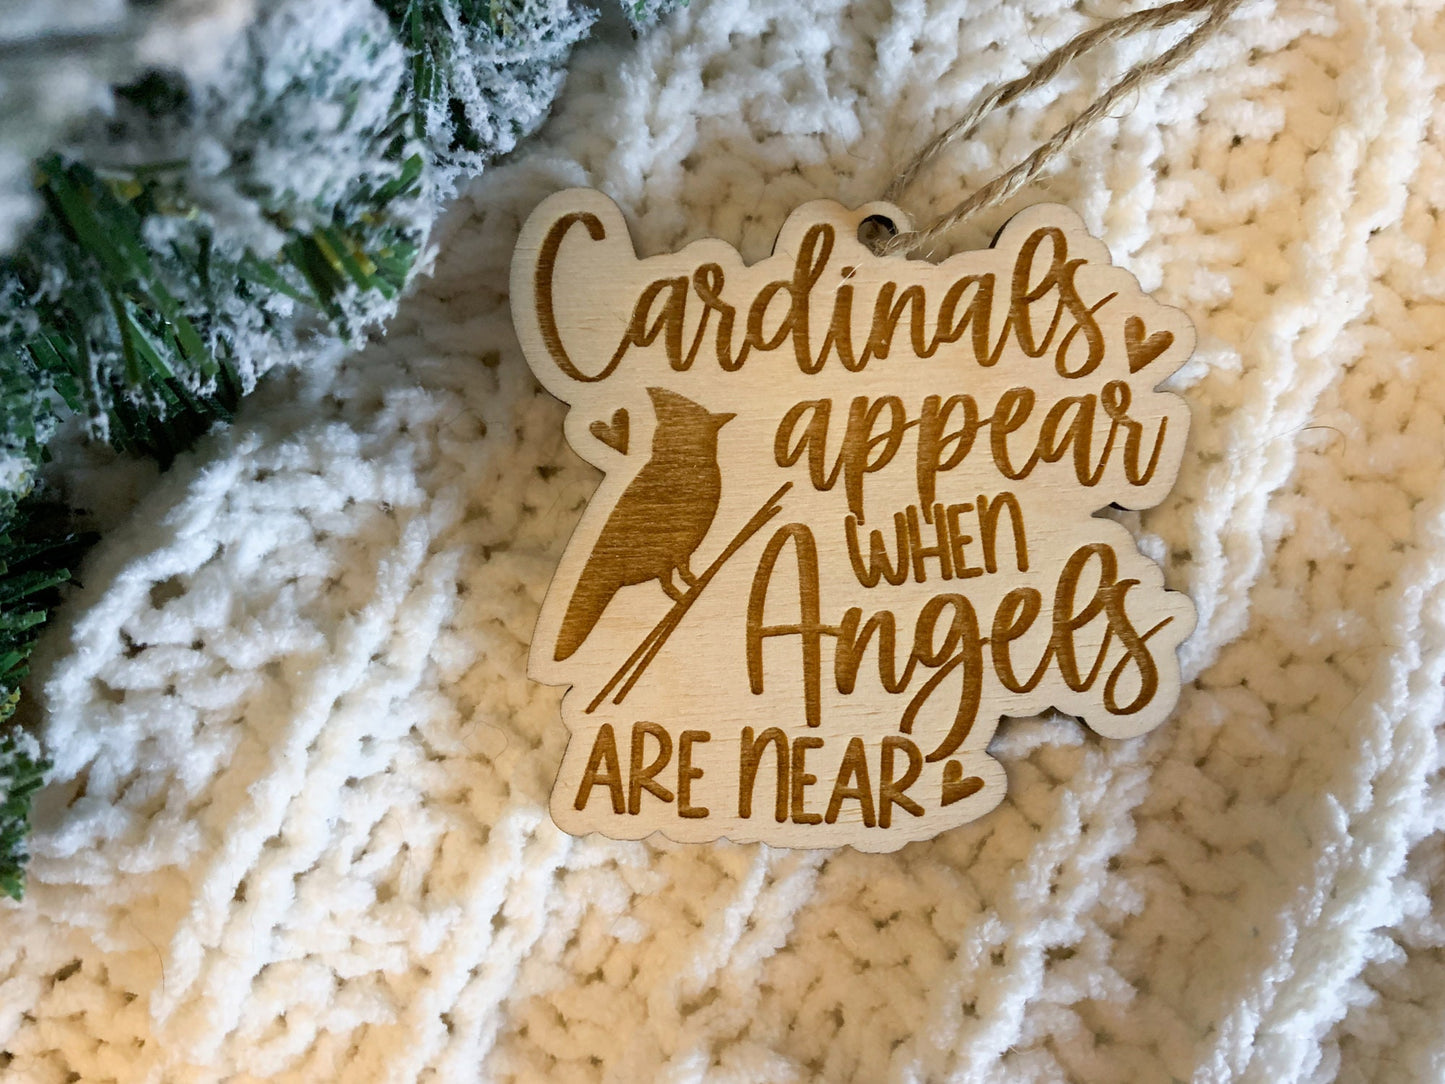 Cardinals Appear When Angels Are Near Ornament